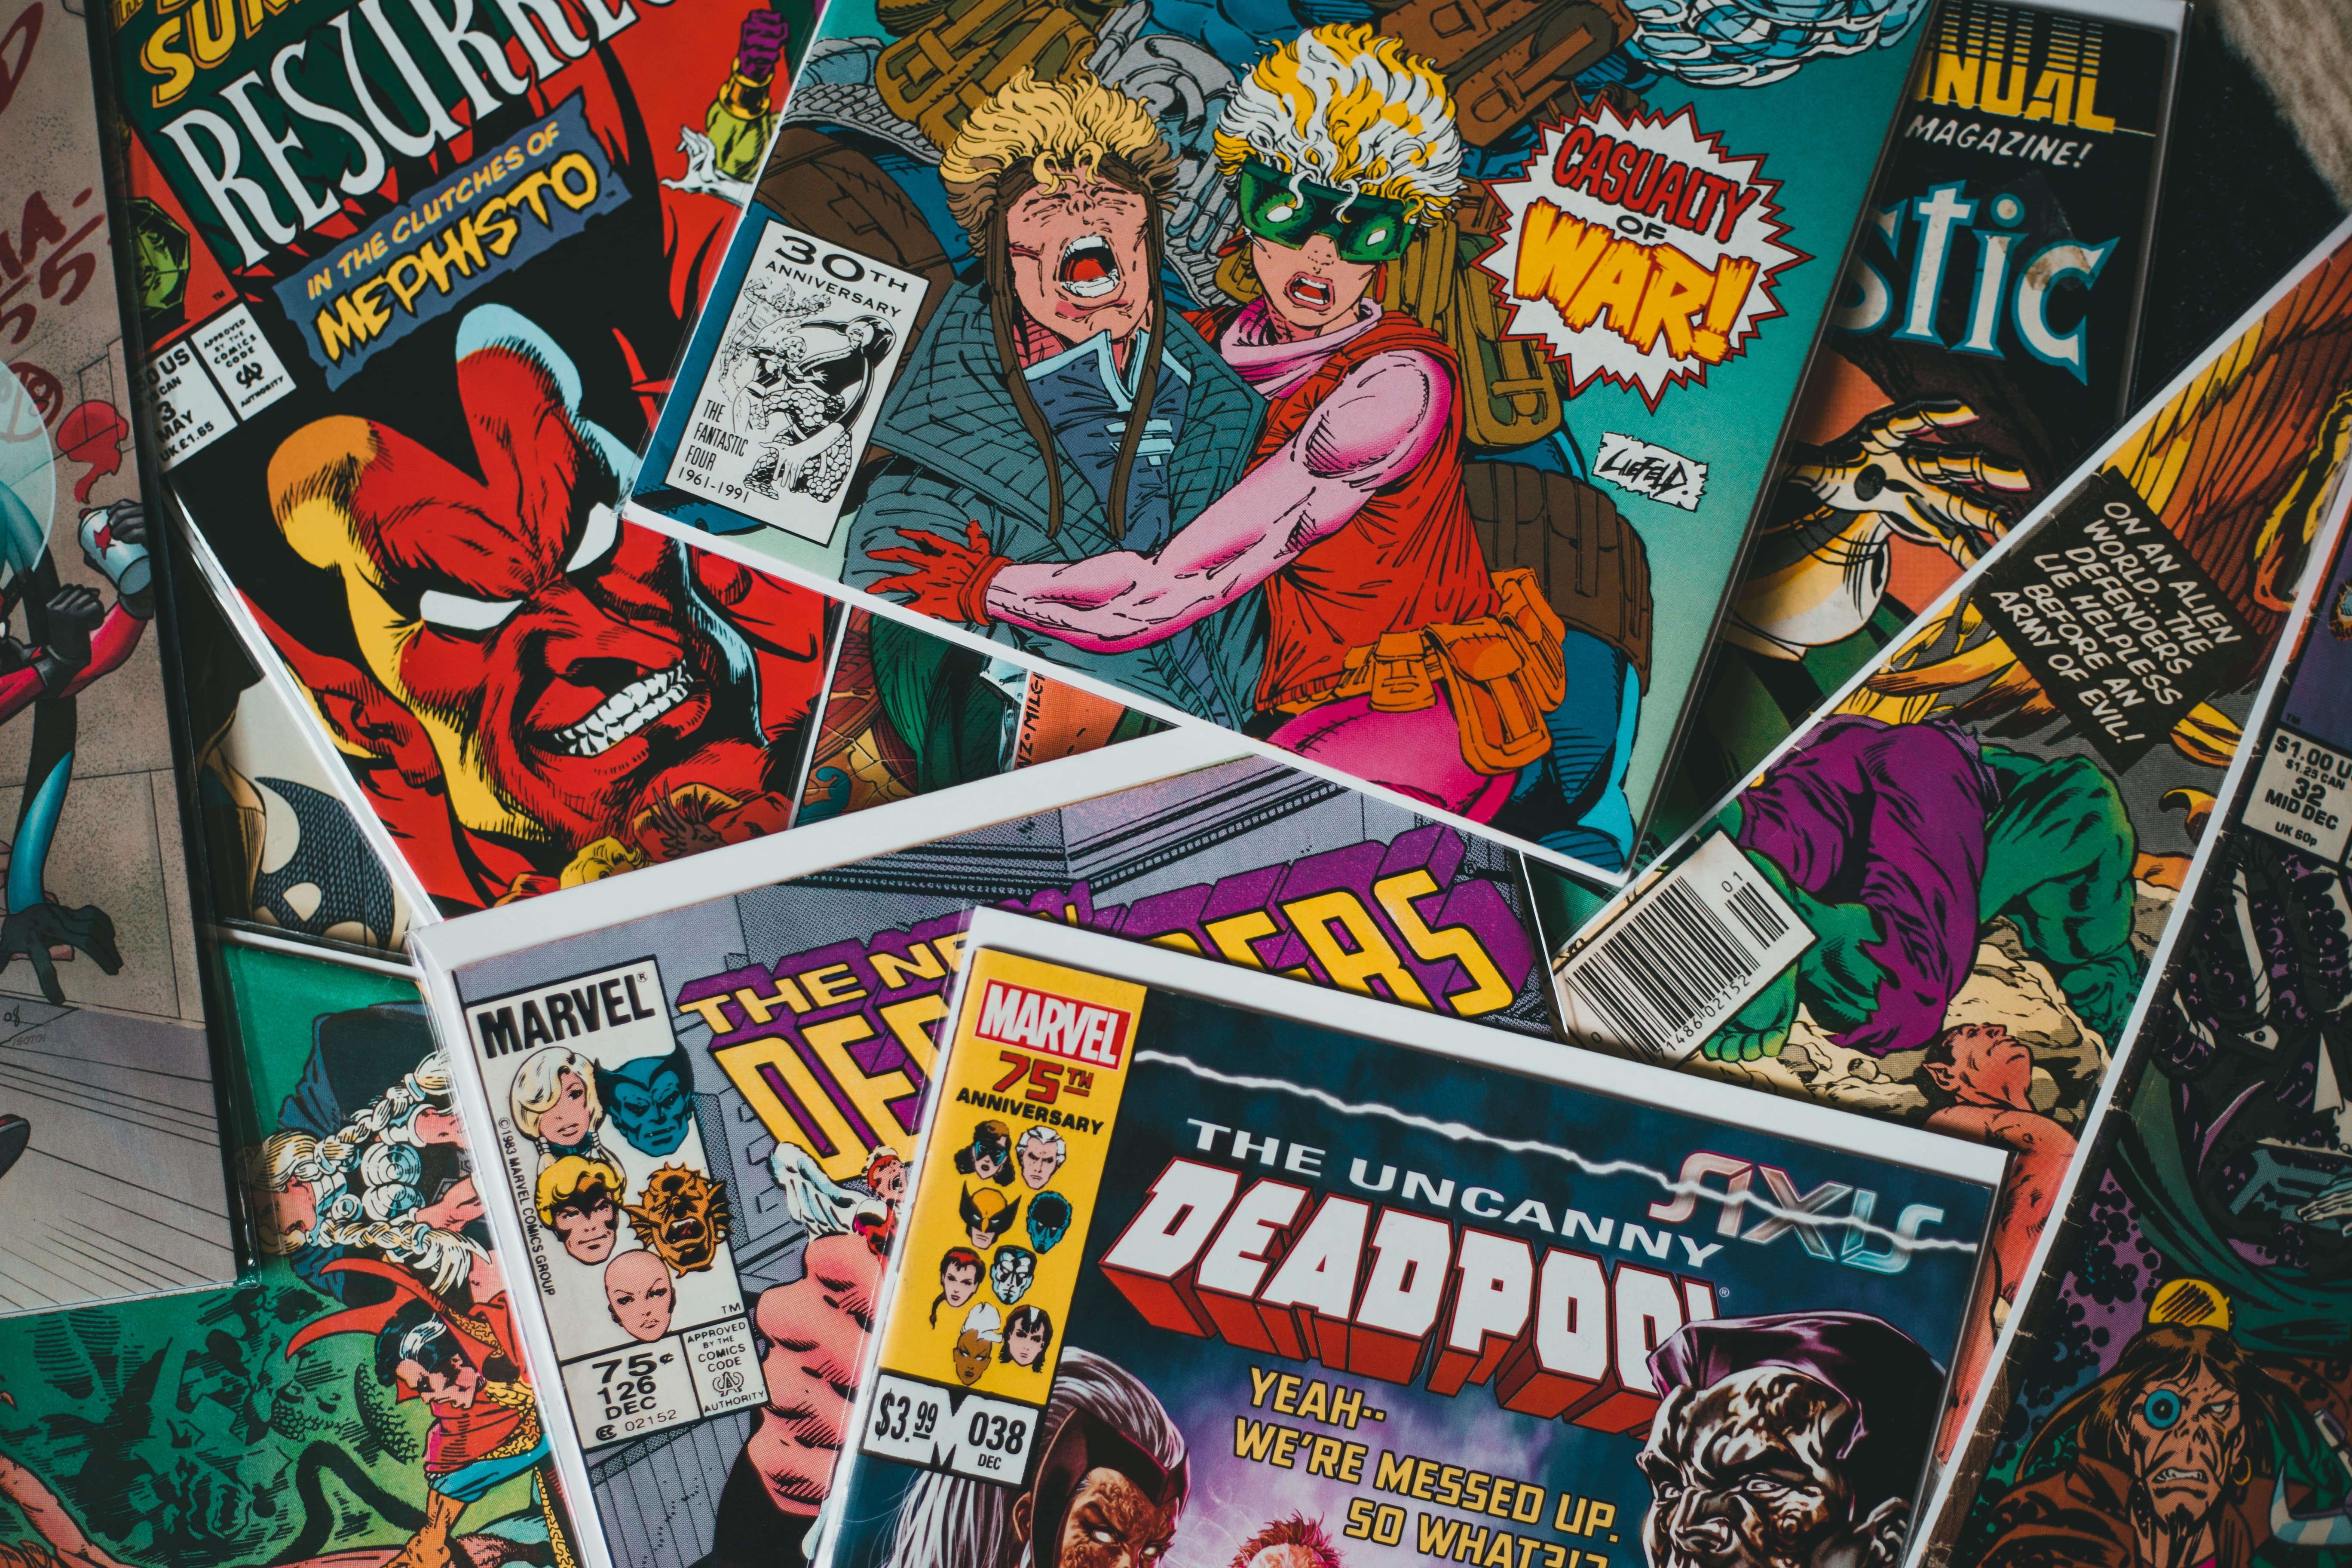 A collection of comic books laid out on a table